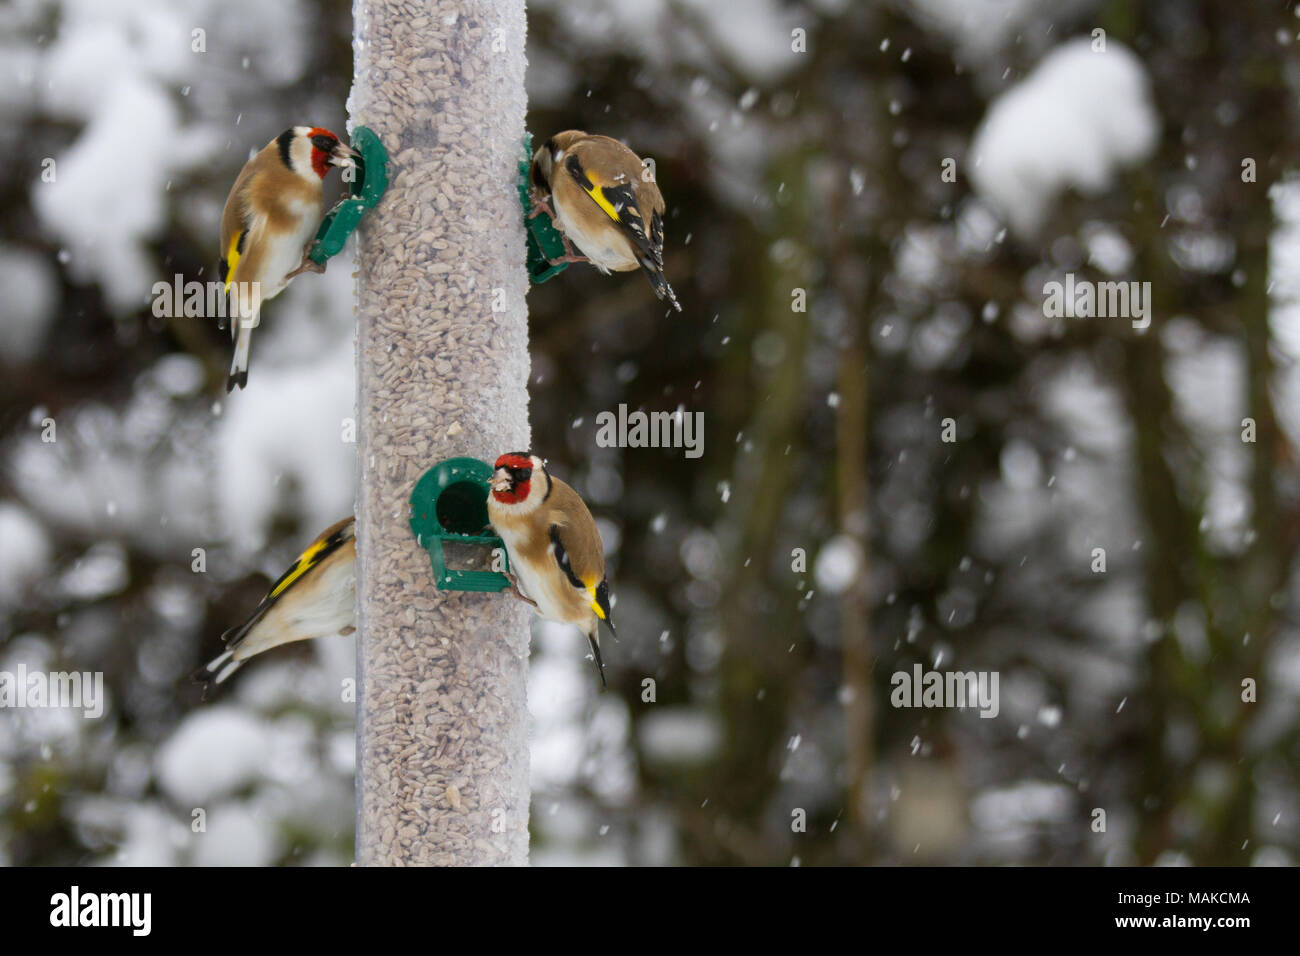 Goldfinches (Carduelis carduelis) on feeder in winter snow, Untied Kingdom Stock Photo